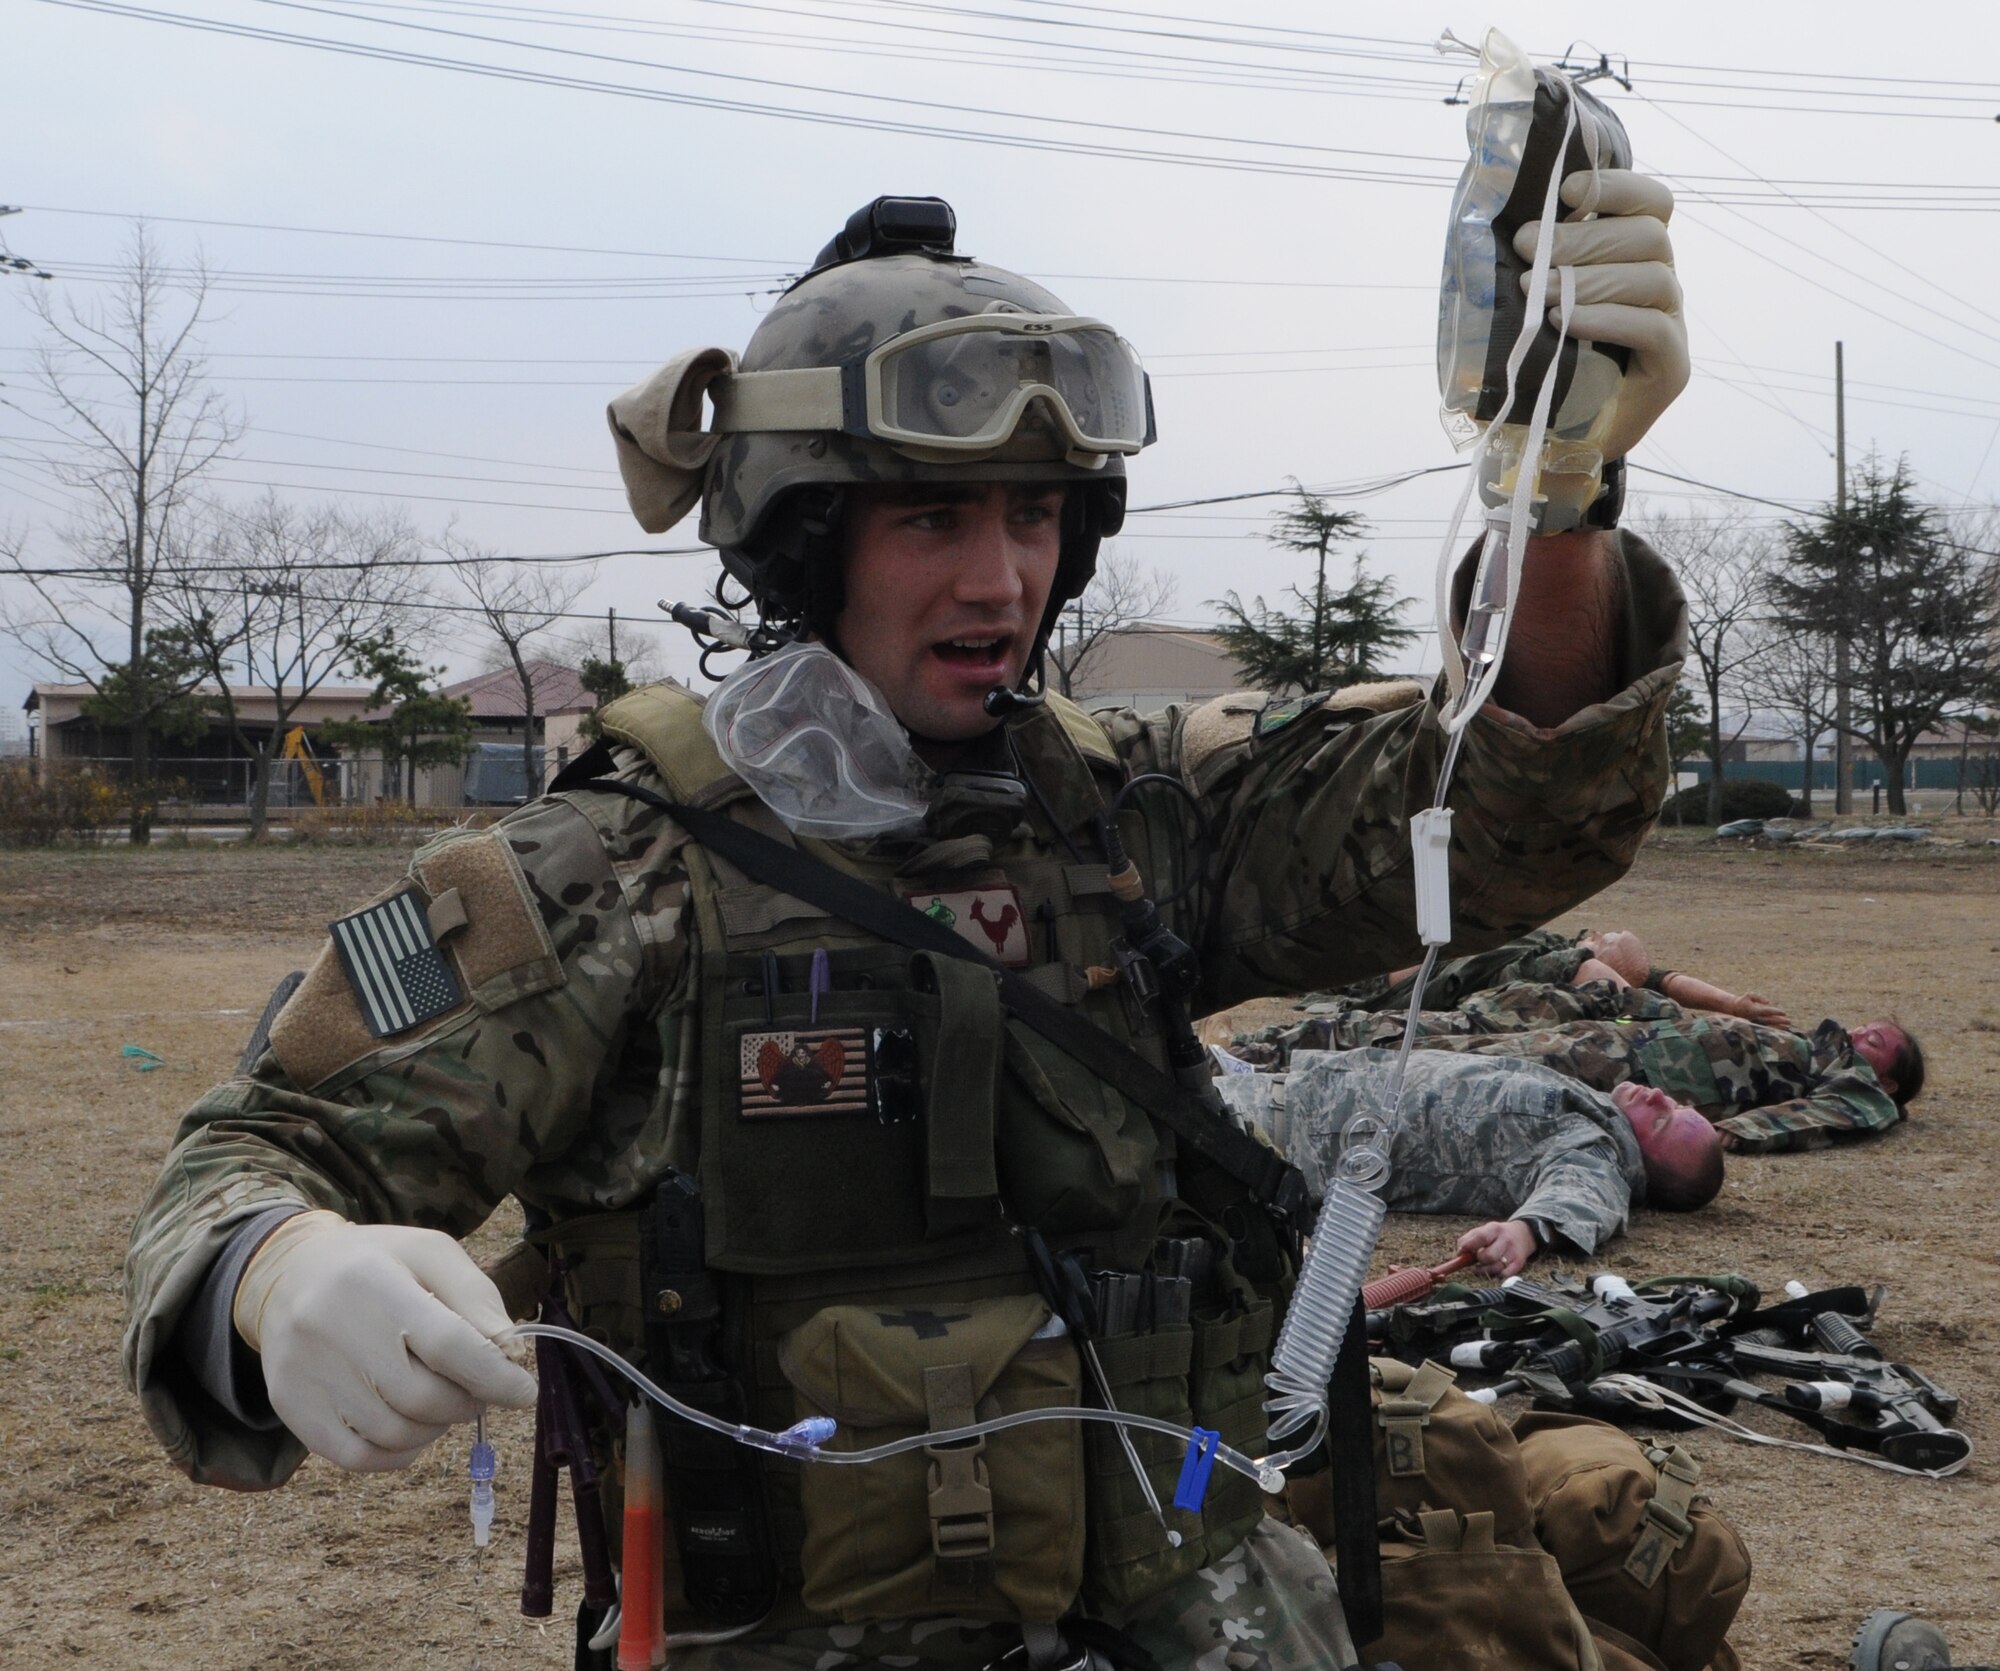 DAEGU AIR BASE, Republic of Korea -- Senior Airman Cody Cerny, a pararescueman from the 320th Special Tactics Squadron, prepares intravenous fluids for a patient during a mass casualty exercise here March 27. The scenario is part of the 353rd Special Operations Group’s annual operational readiness exercise. (U.S. Air Force photo by Tech. Sgt. Aaron Cram)